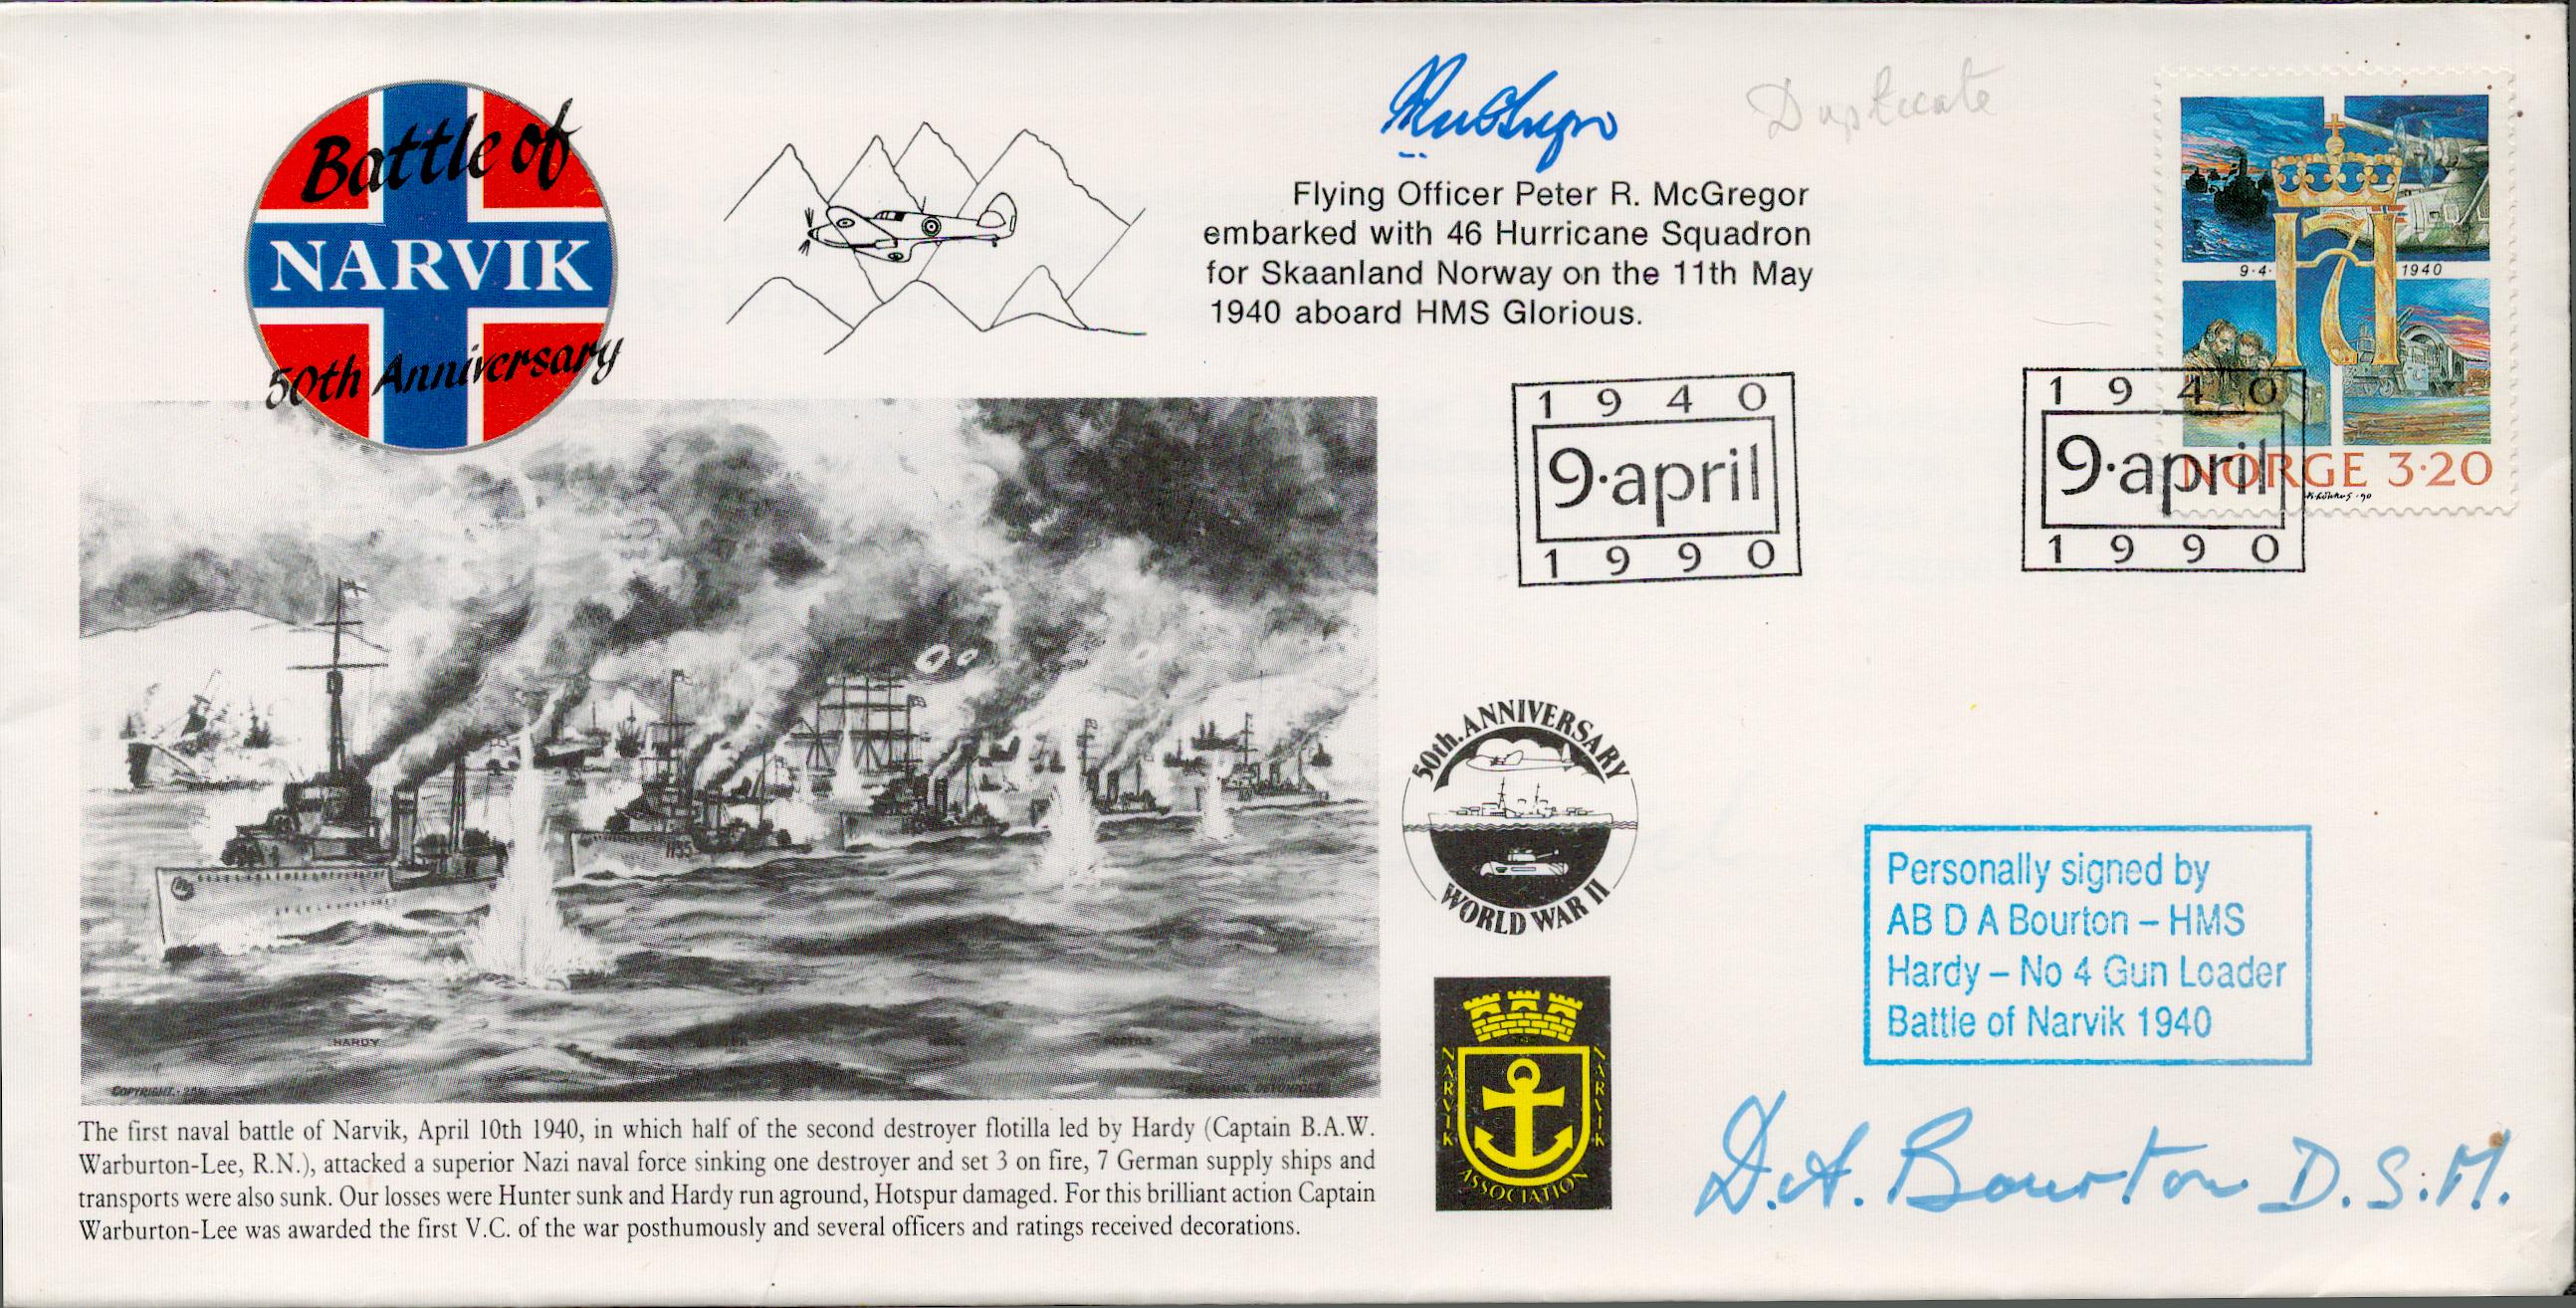 F/O Peter McGregor and AD Bourton Signed Battle of Narvik 50th Anniversary FDC. 17 of 30 Covers